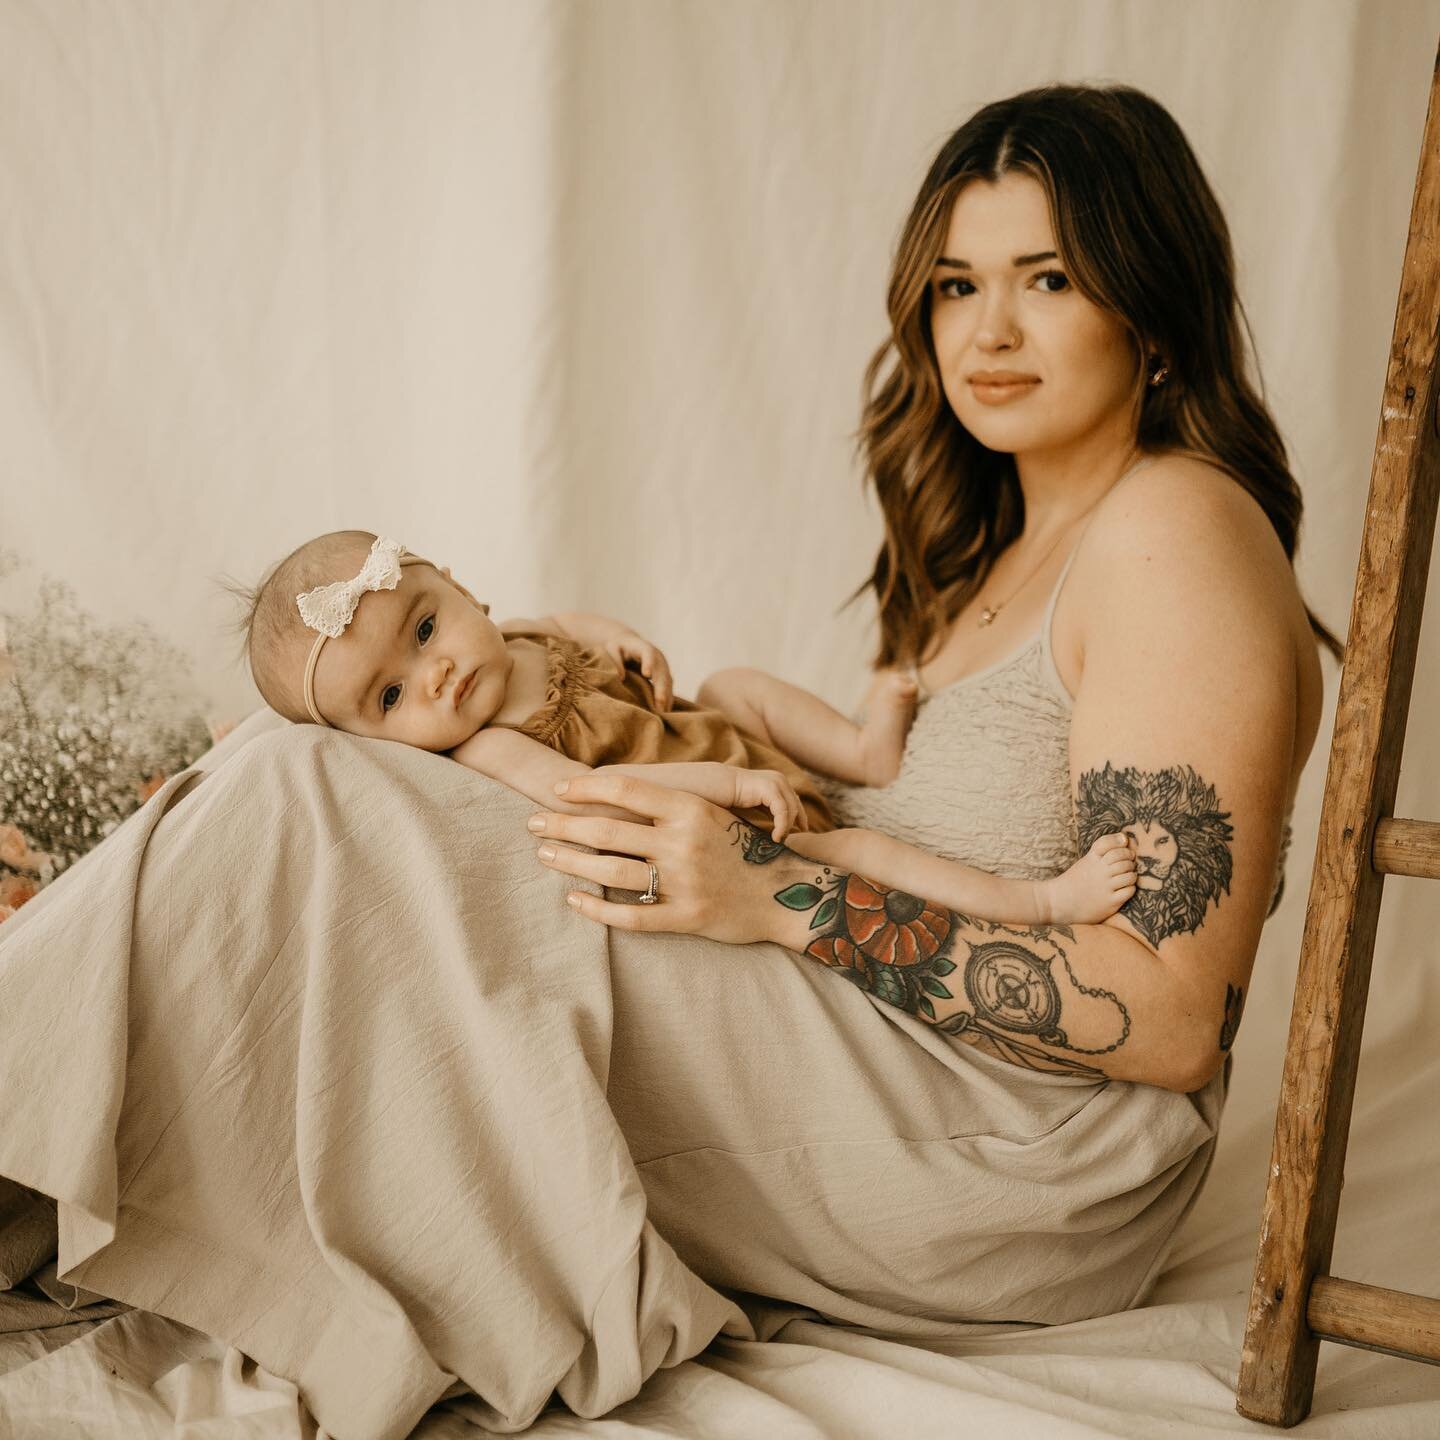 I&rsquo;m in love with these photos 😍 what do you think? @hairxalli 

#tylertxphotographer #springminis #etxphotographer #motherhood #longviewtxphotographer #newmom #newbornphotography